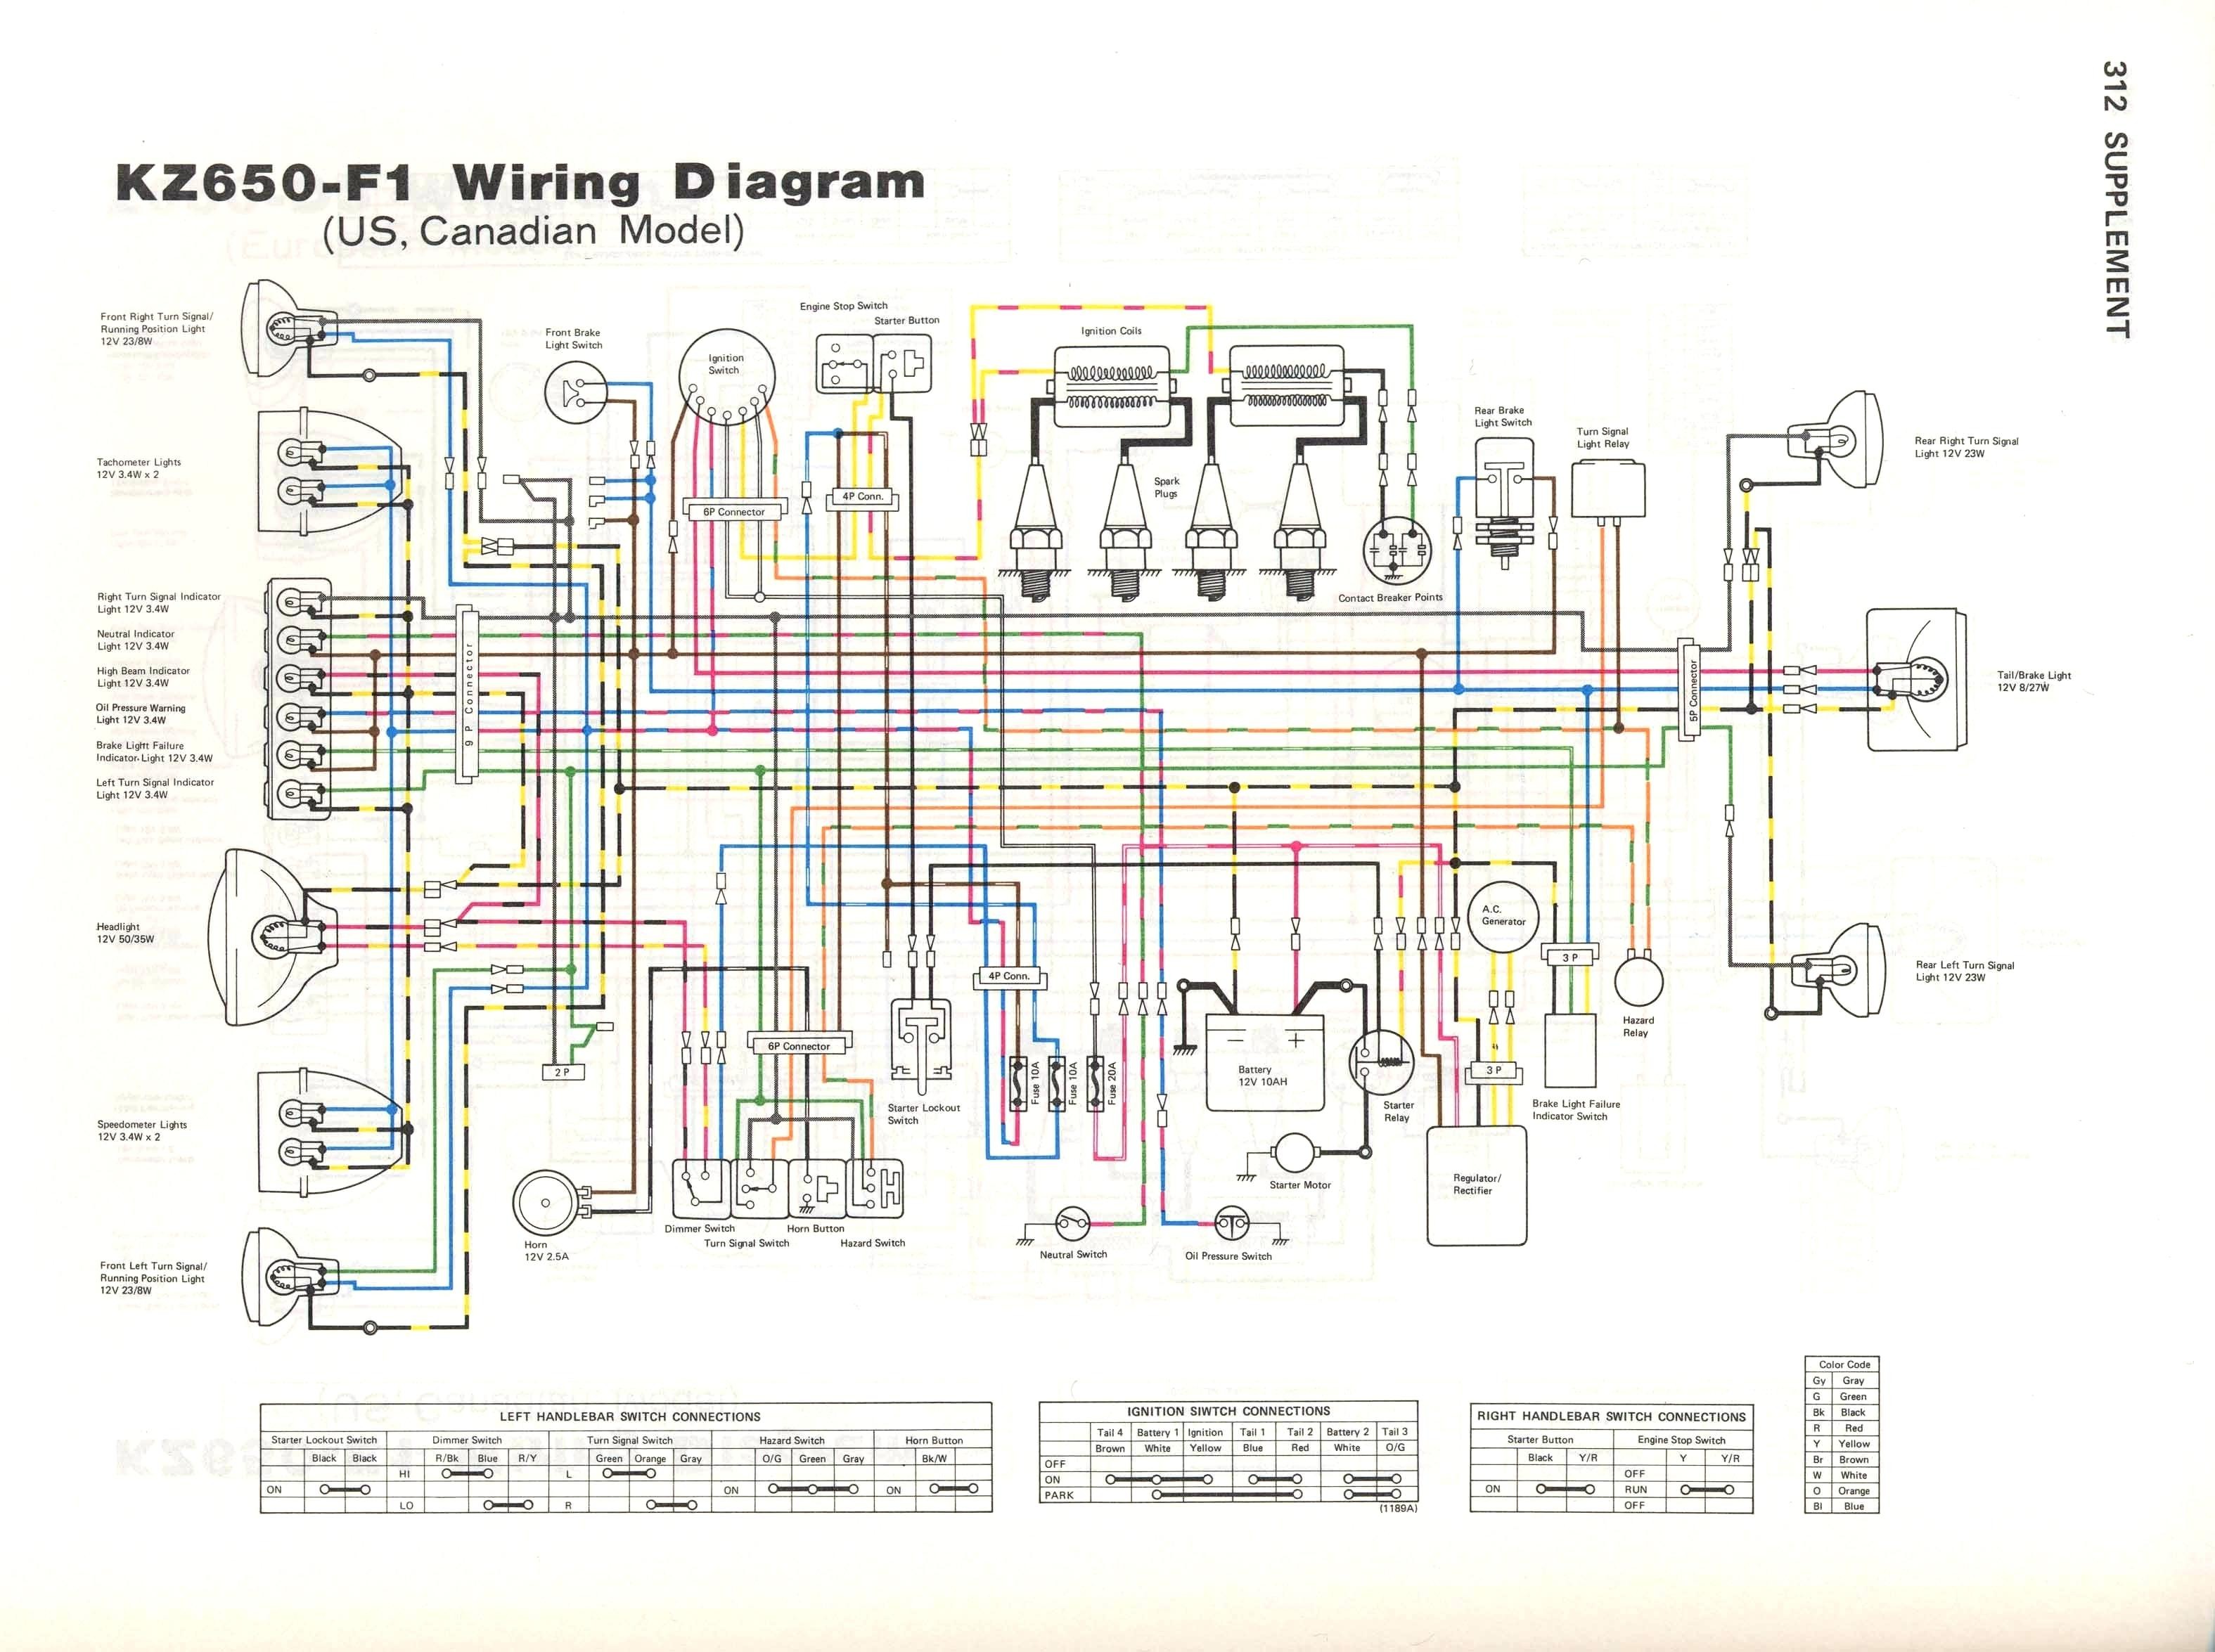 Mega Wiring Diagram Best Wiring Diagram for thermostat Baseboard Heater Diagrams